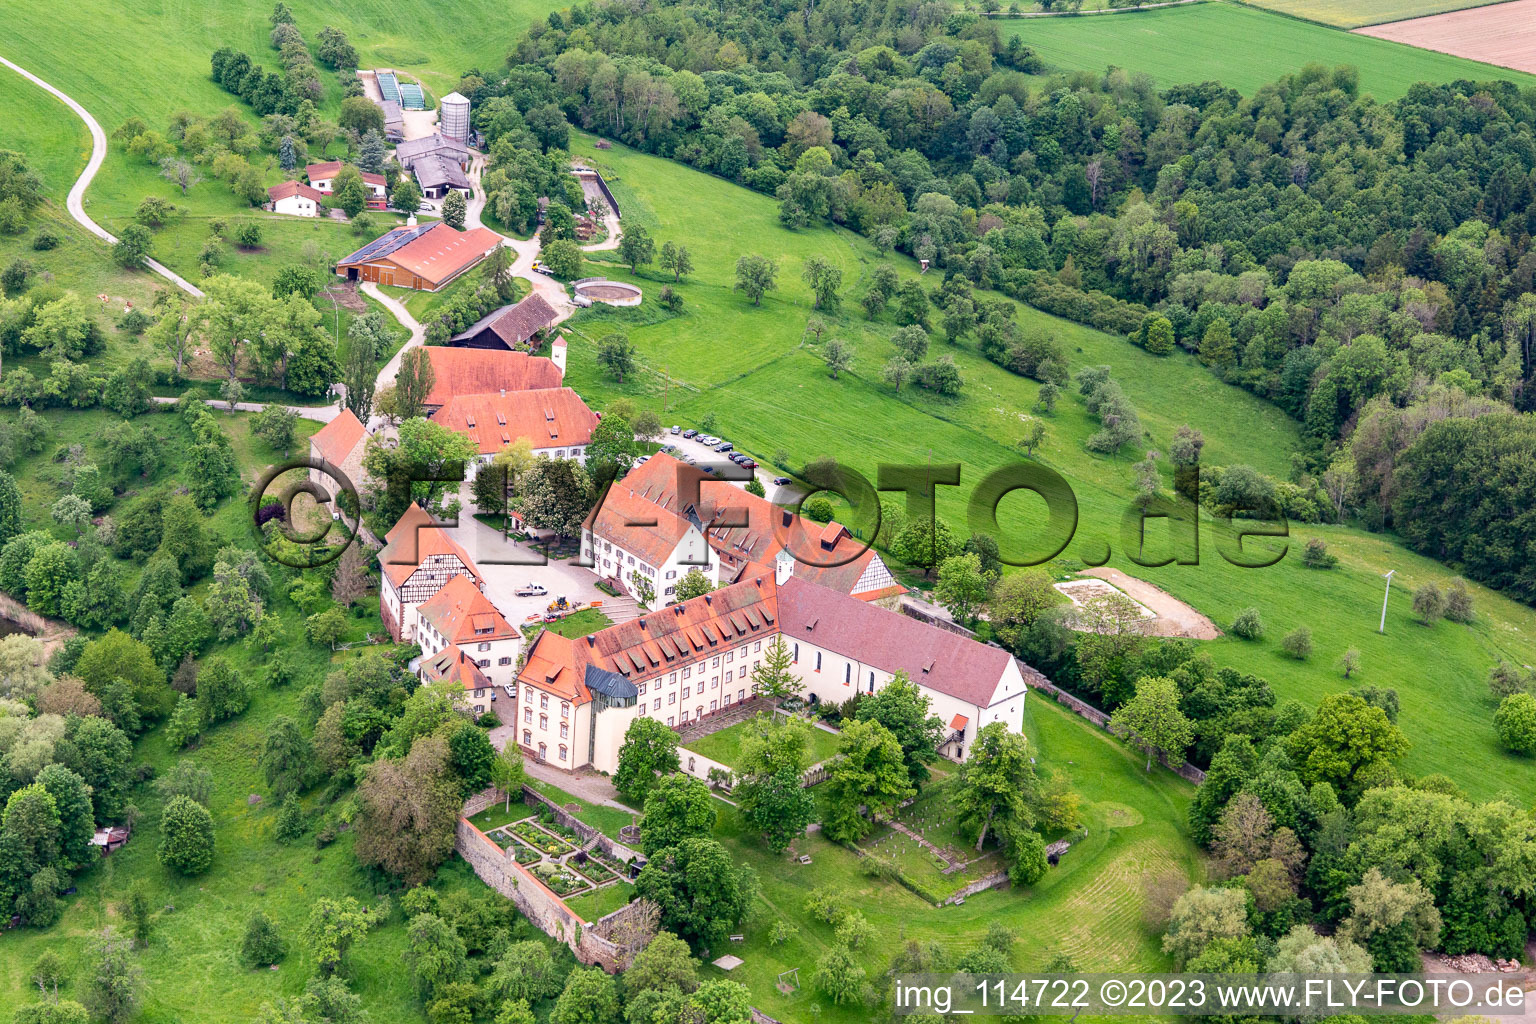 Complex of buildings of the monastery Kirchberg in Sulz am Neckar in the state Baden-Wurttemberg, Germany